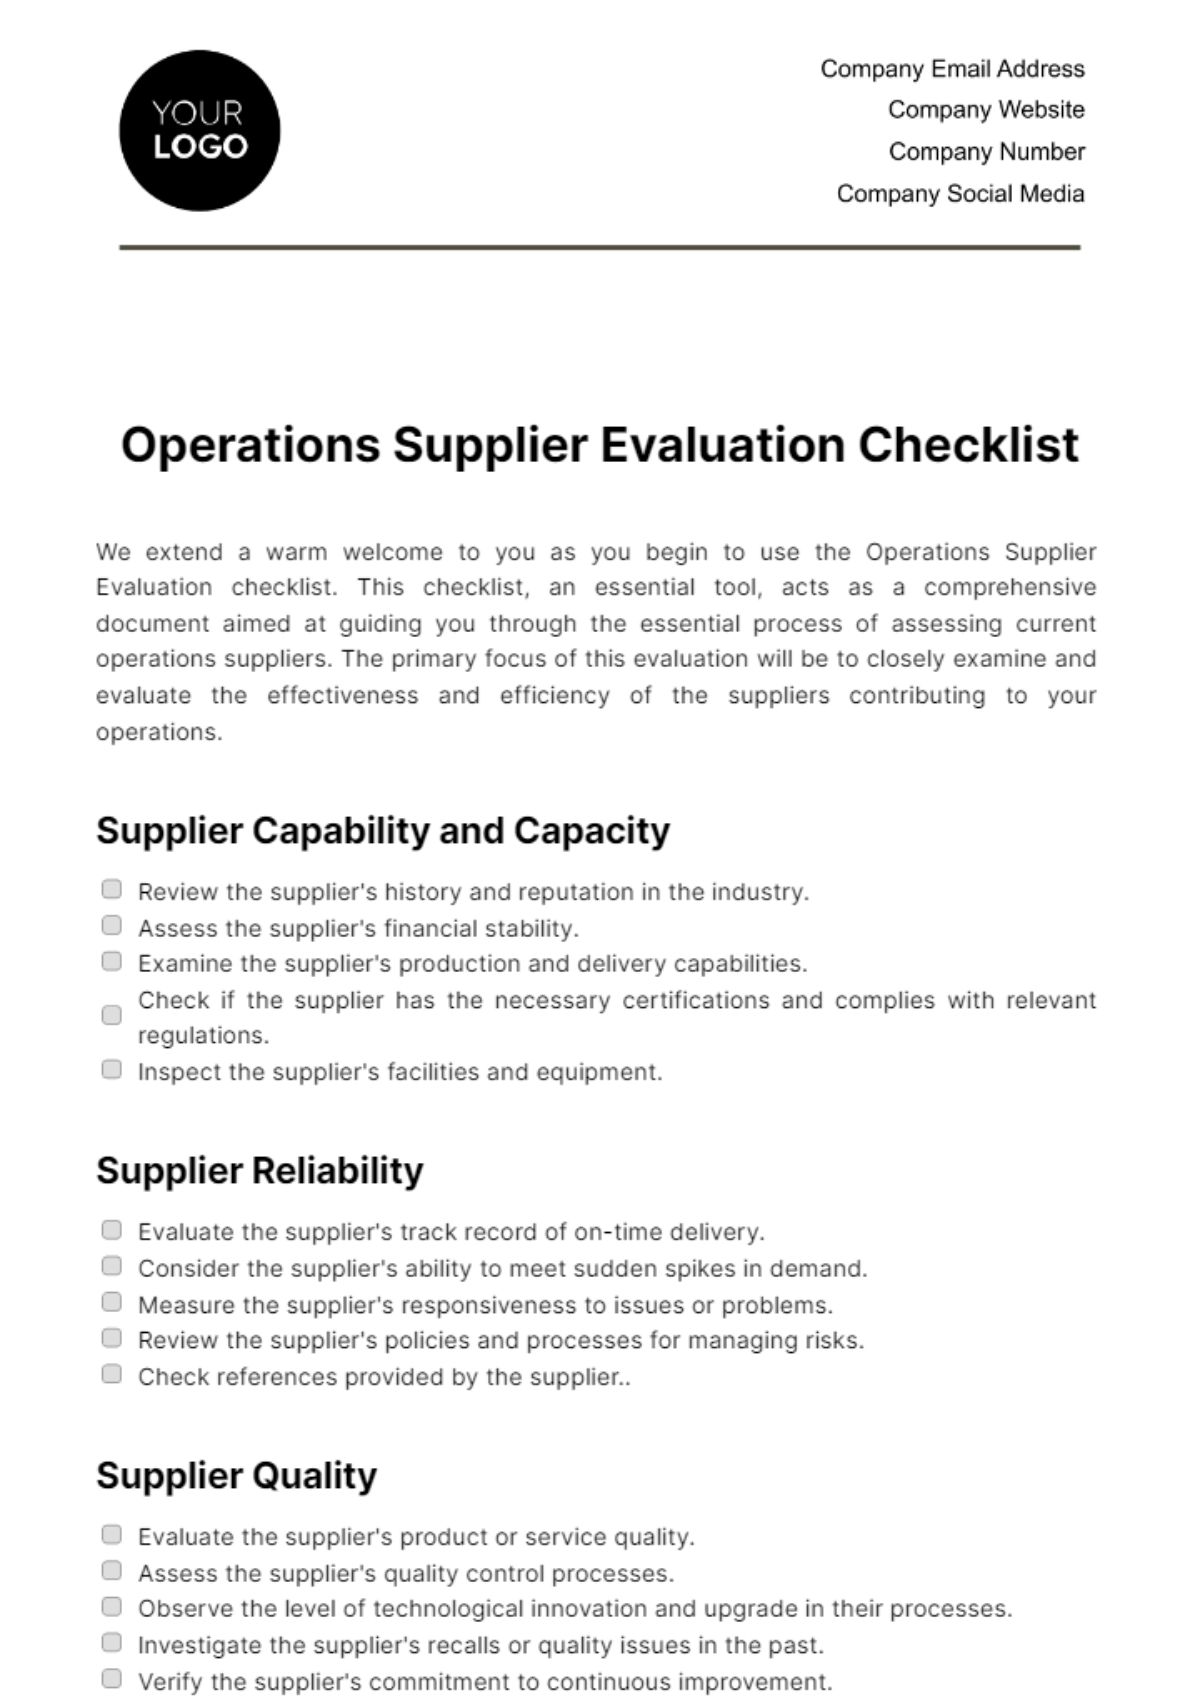 Operations Supplier Evaluation Checklist Template